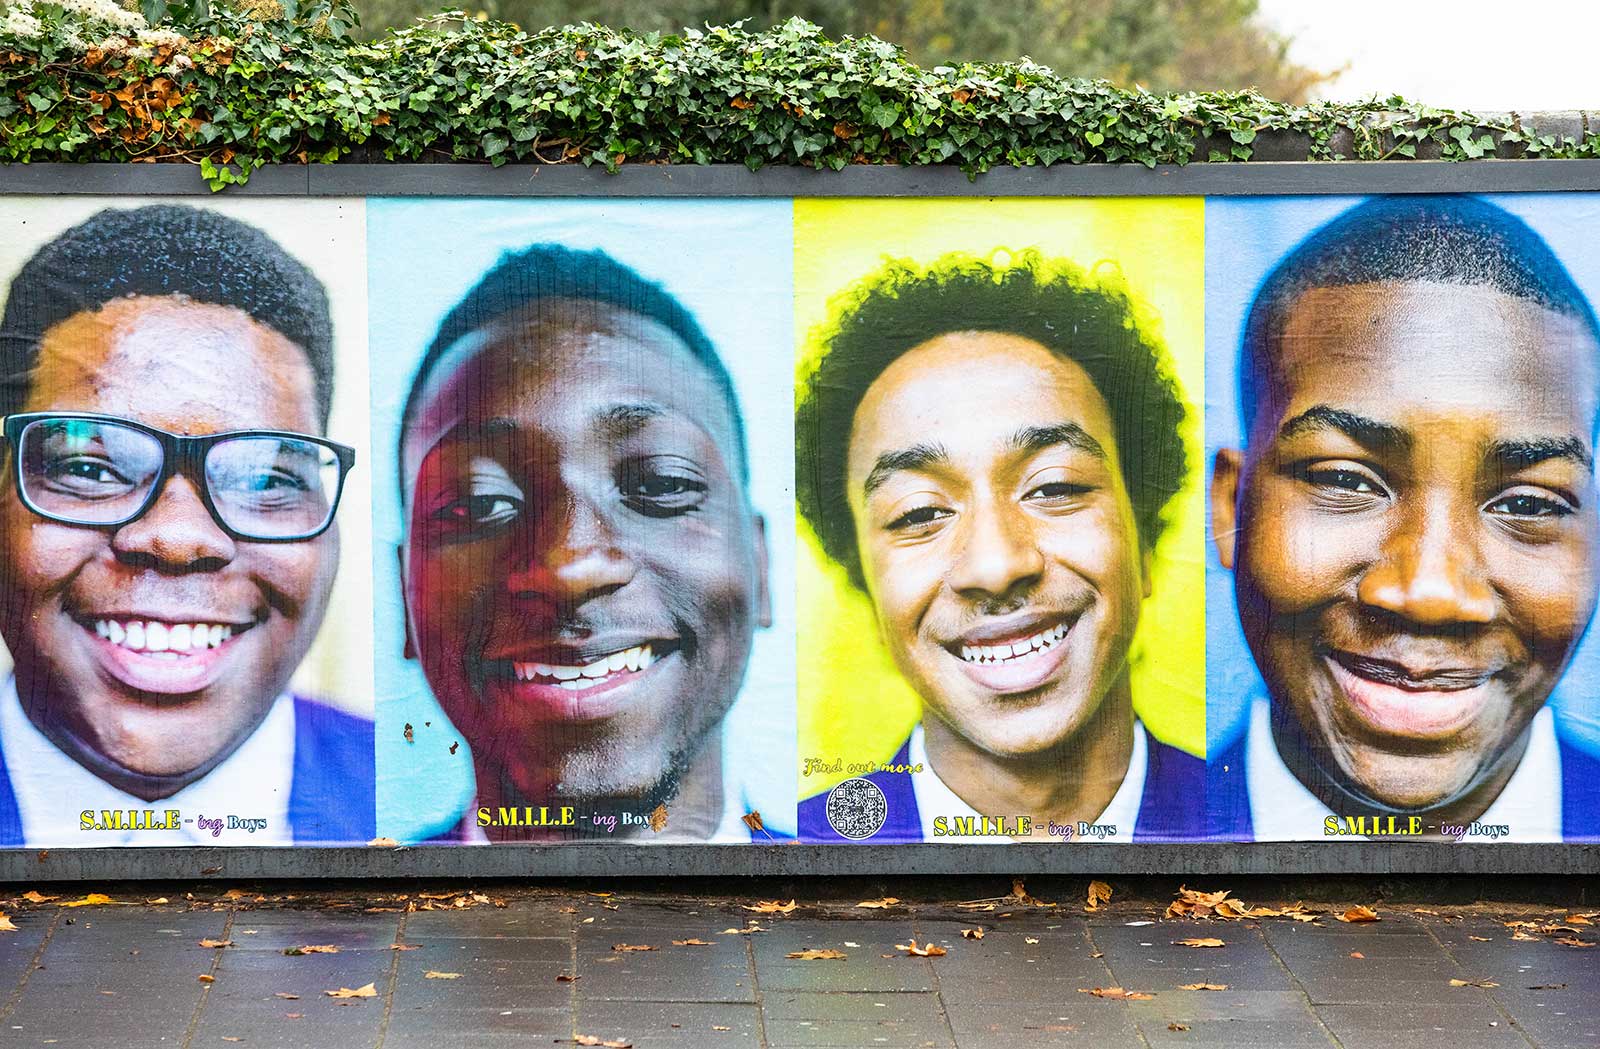 Hackney Council’s S.M.I.L.E-ing Boys project is beaming from the street-sides